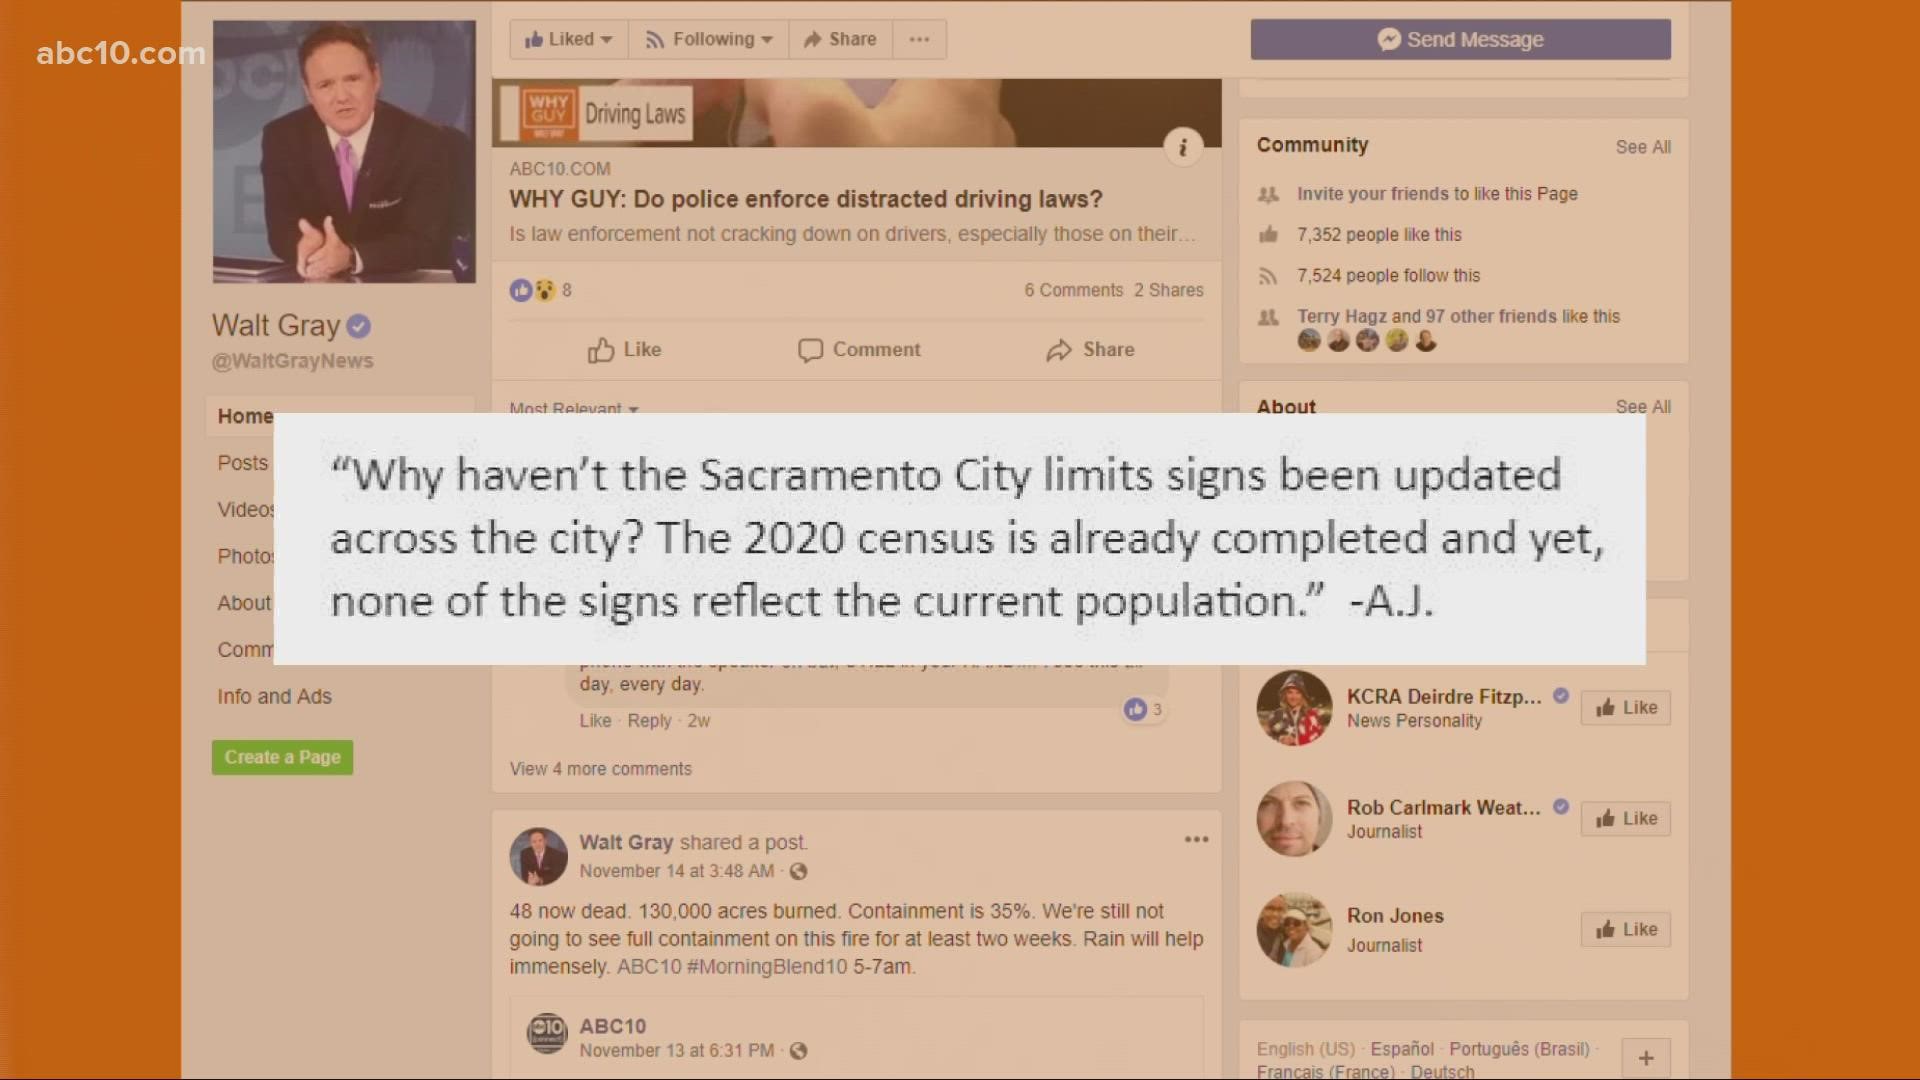 ABC10's Walt Gray is back with another Why Guy, this time answering a viewer's question about updating the population signs in Sacramento.